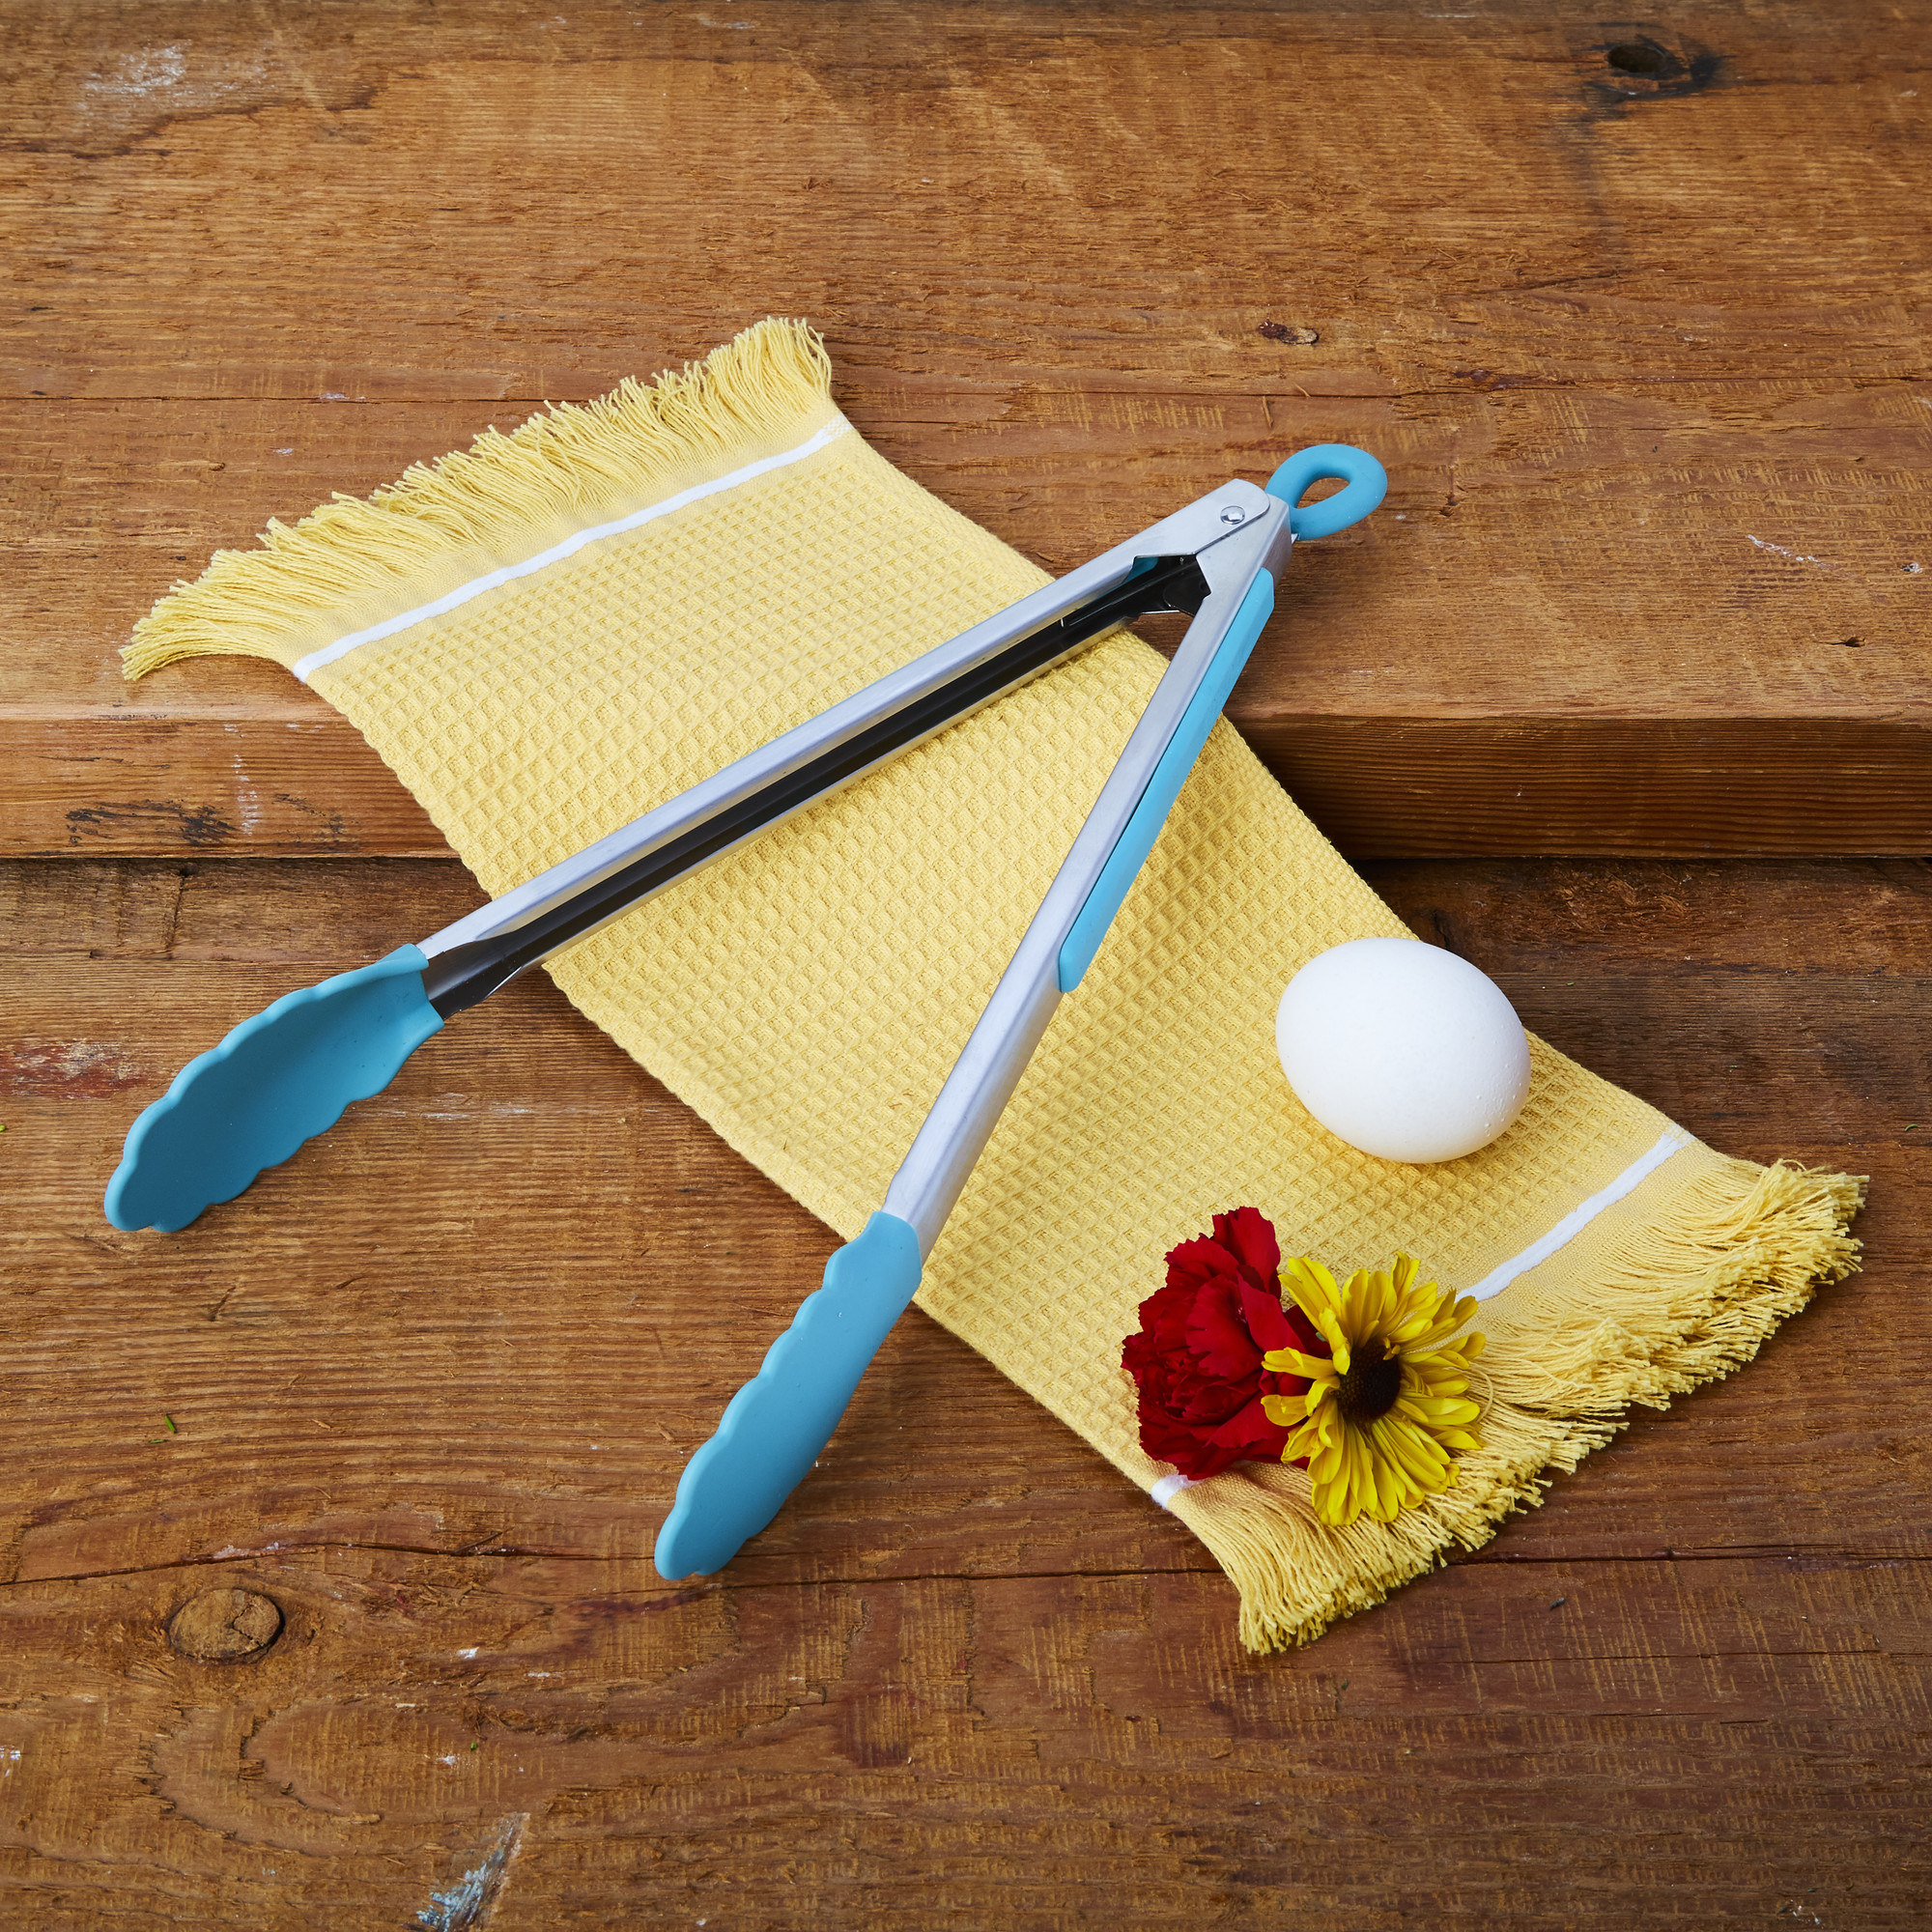 The blue tongs on a yellow kitchen towel